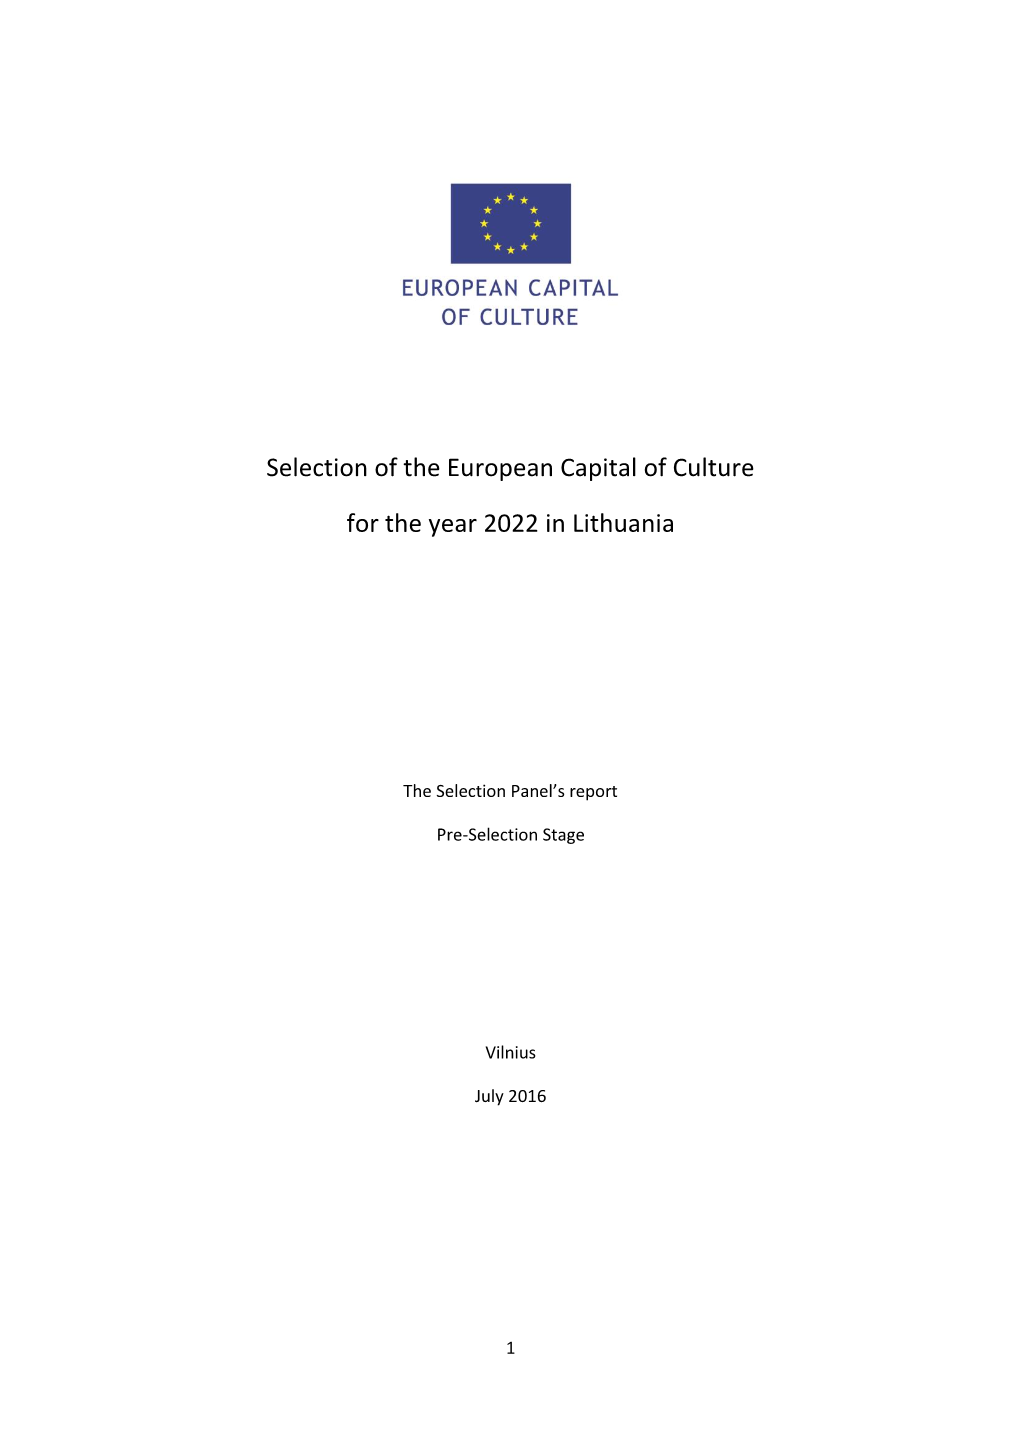 Selection of the 2022 European Capital of Culture in Lithuania